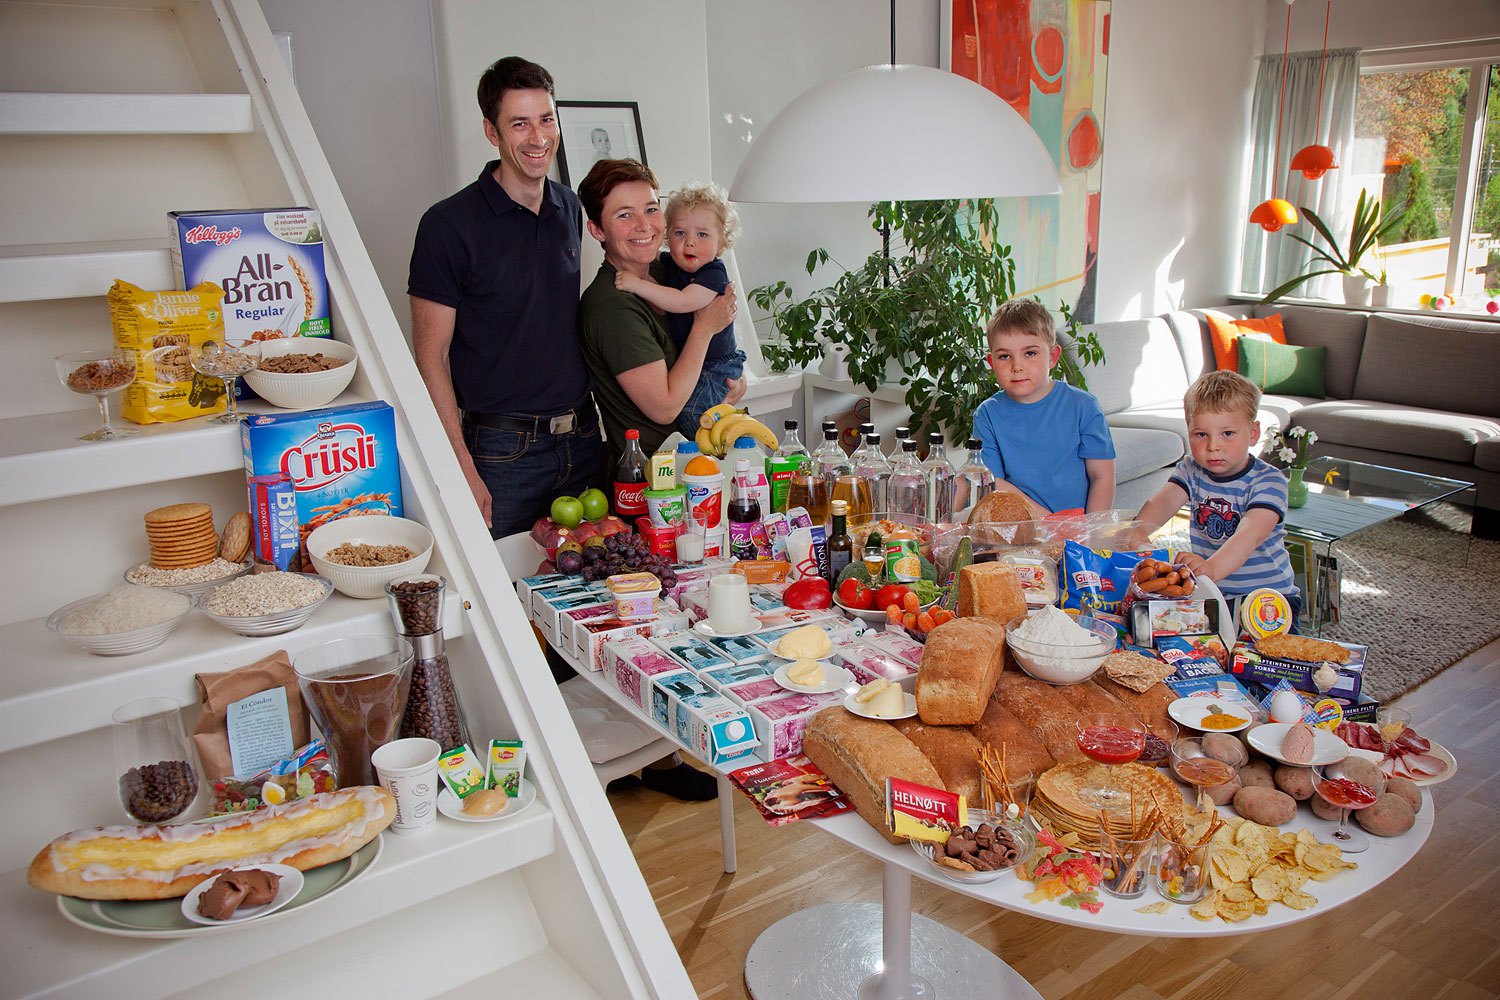 Norway: The Ottersland Dahl Family of Gjettum. 
                              
                              Food expenditure for one week: 2211.97 Norwegian Kroner; $379.41 USD. Favorite foods: fresh baked bread with butter and sugar, pancakes, tomato soup with macaroni and cold milk, yoghurt